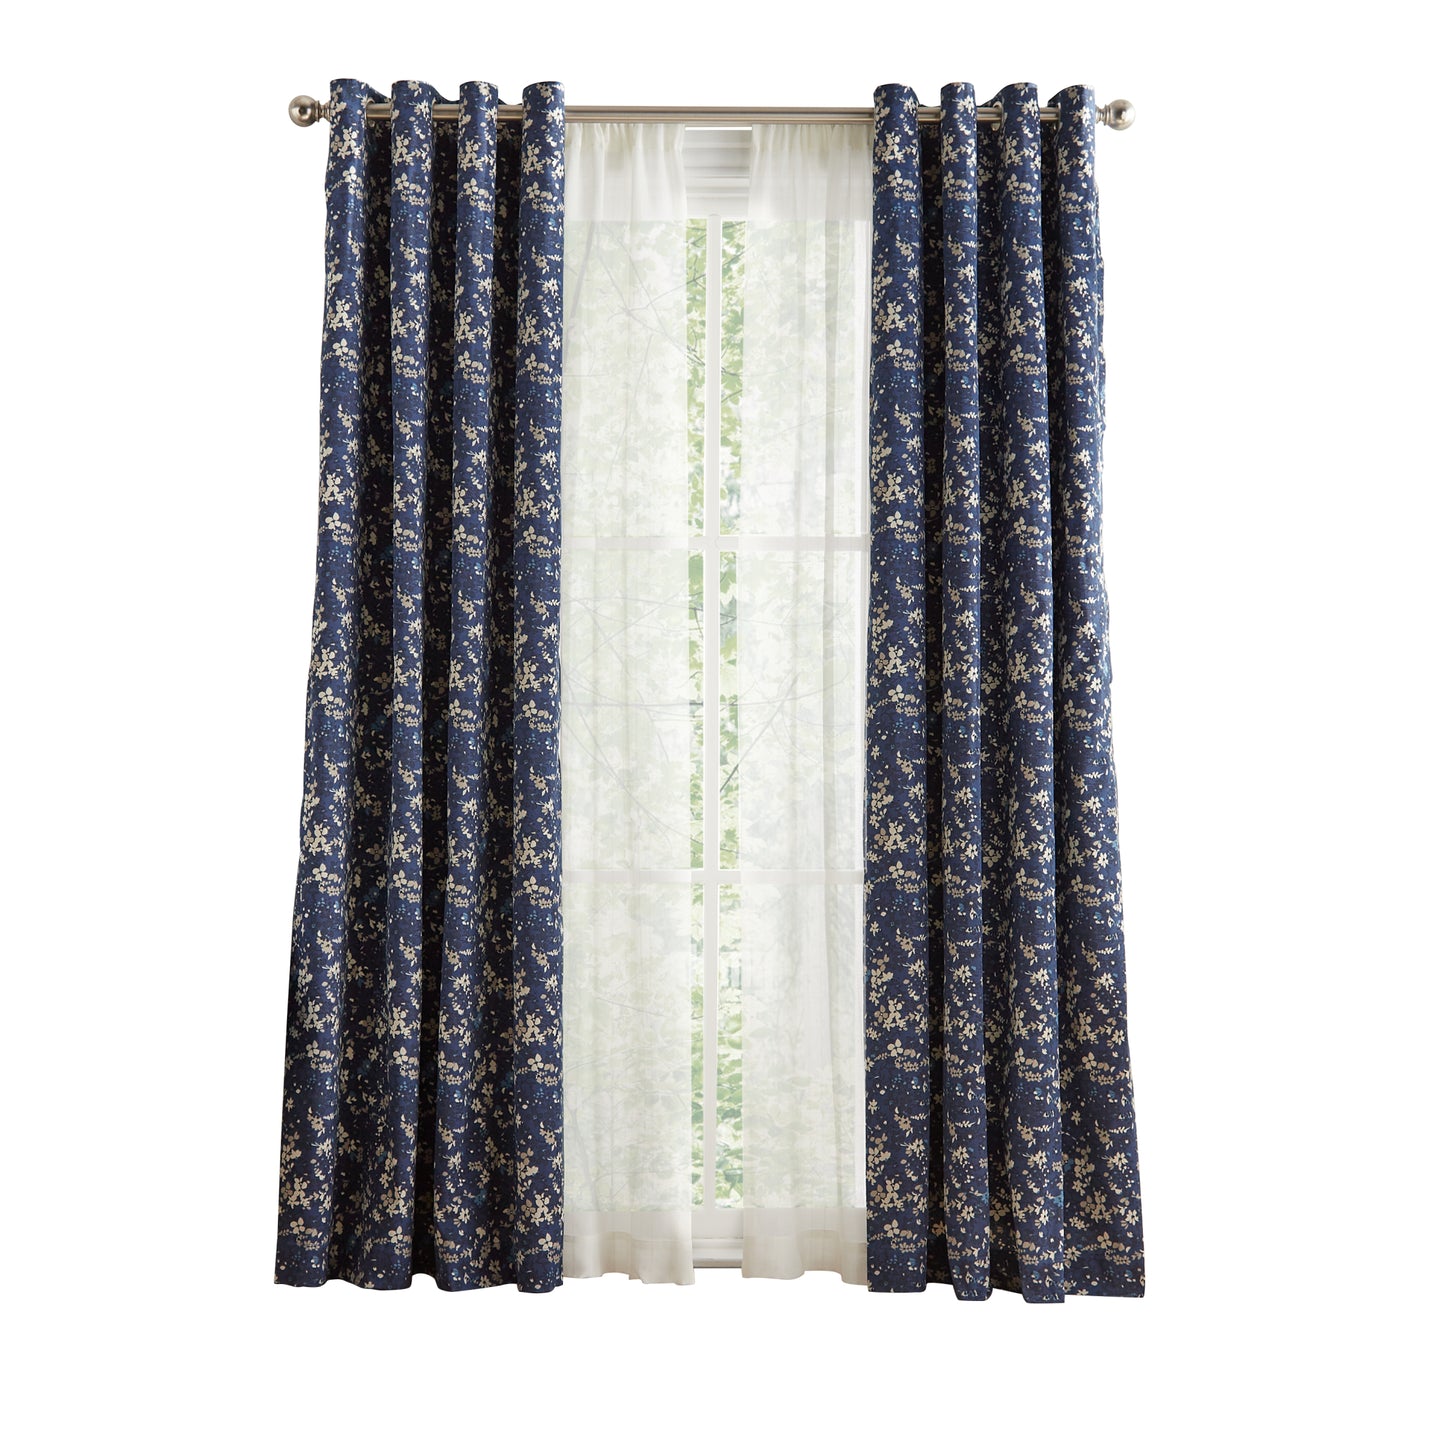 Tommy Hilfiger Carine Floral Curtain Panel Pair